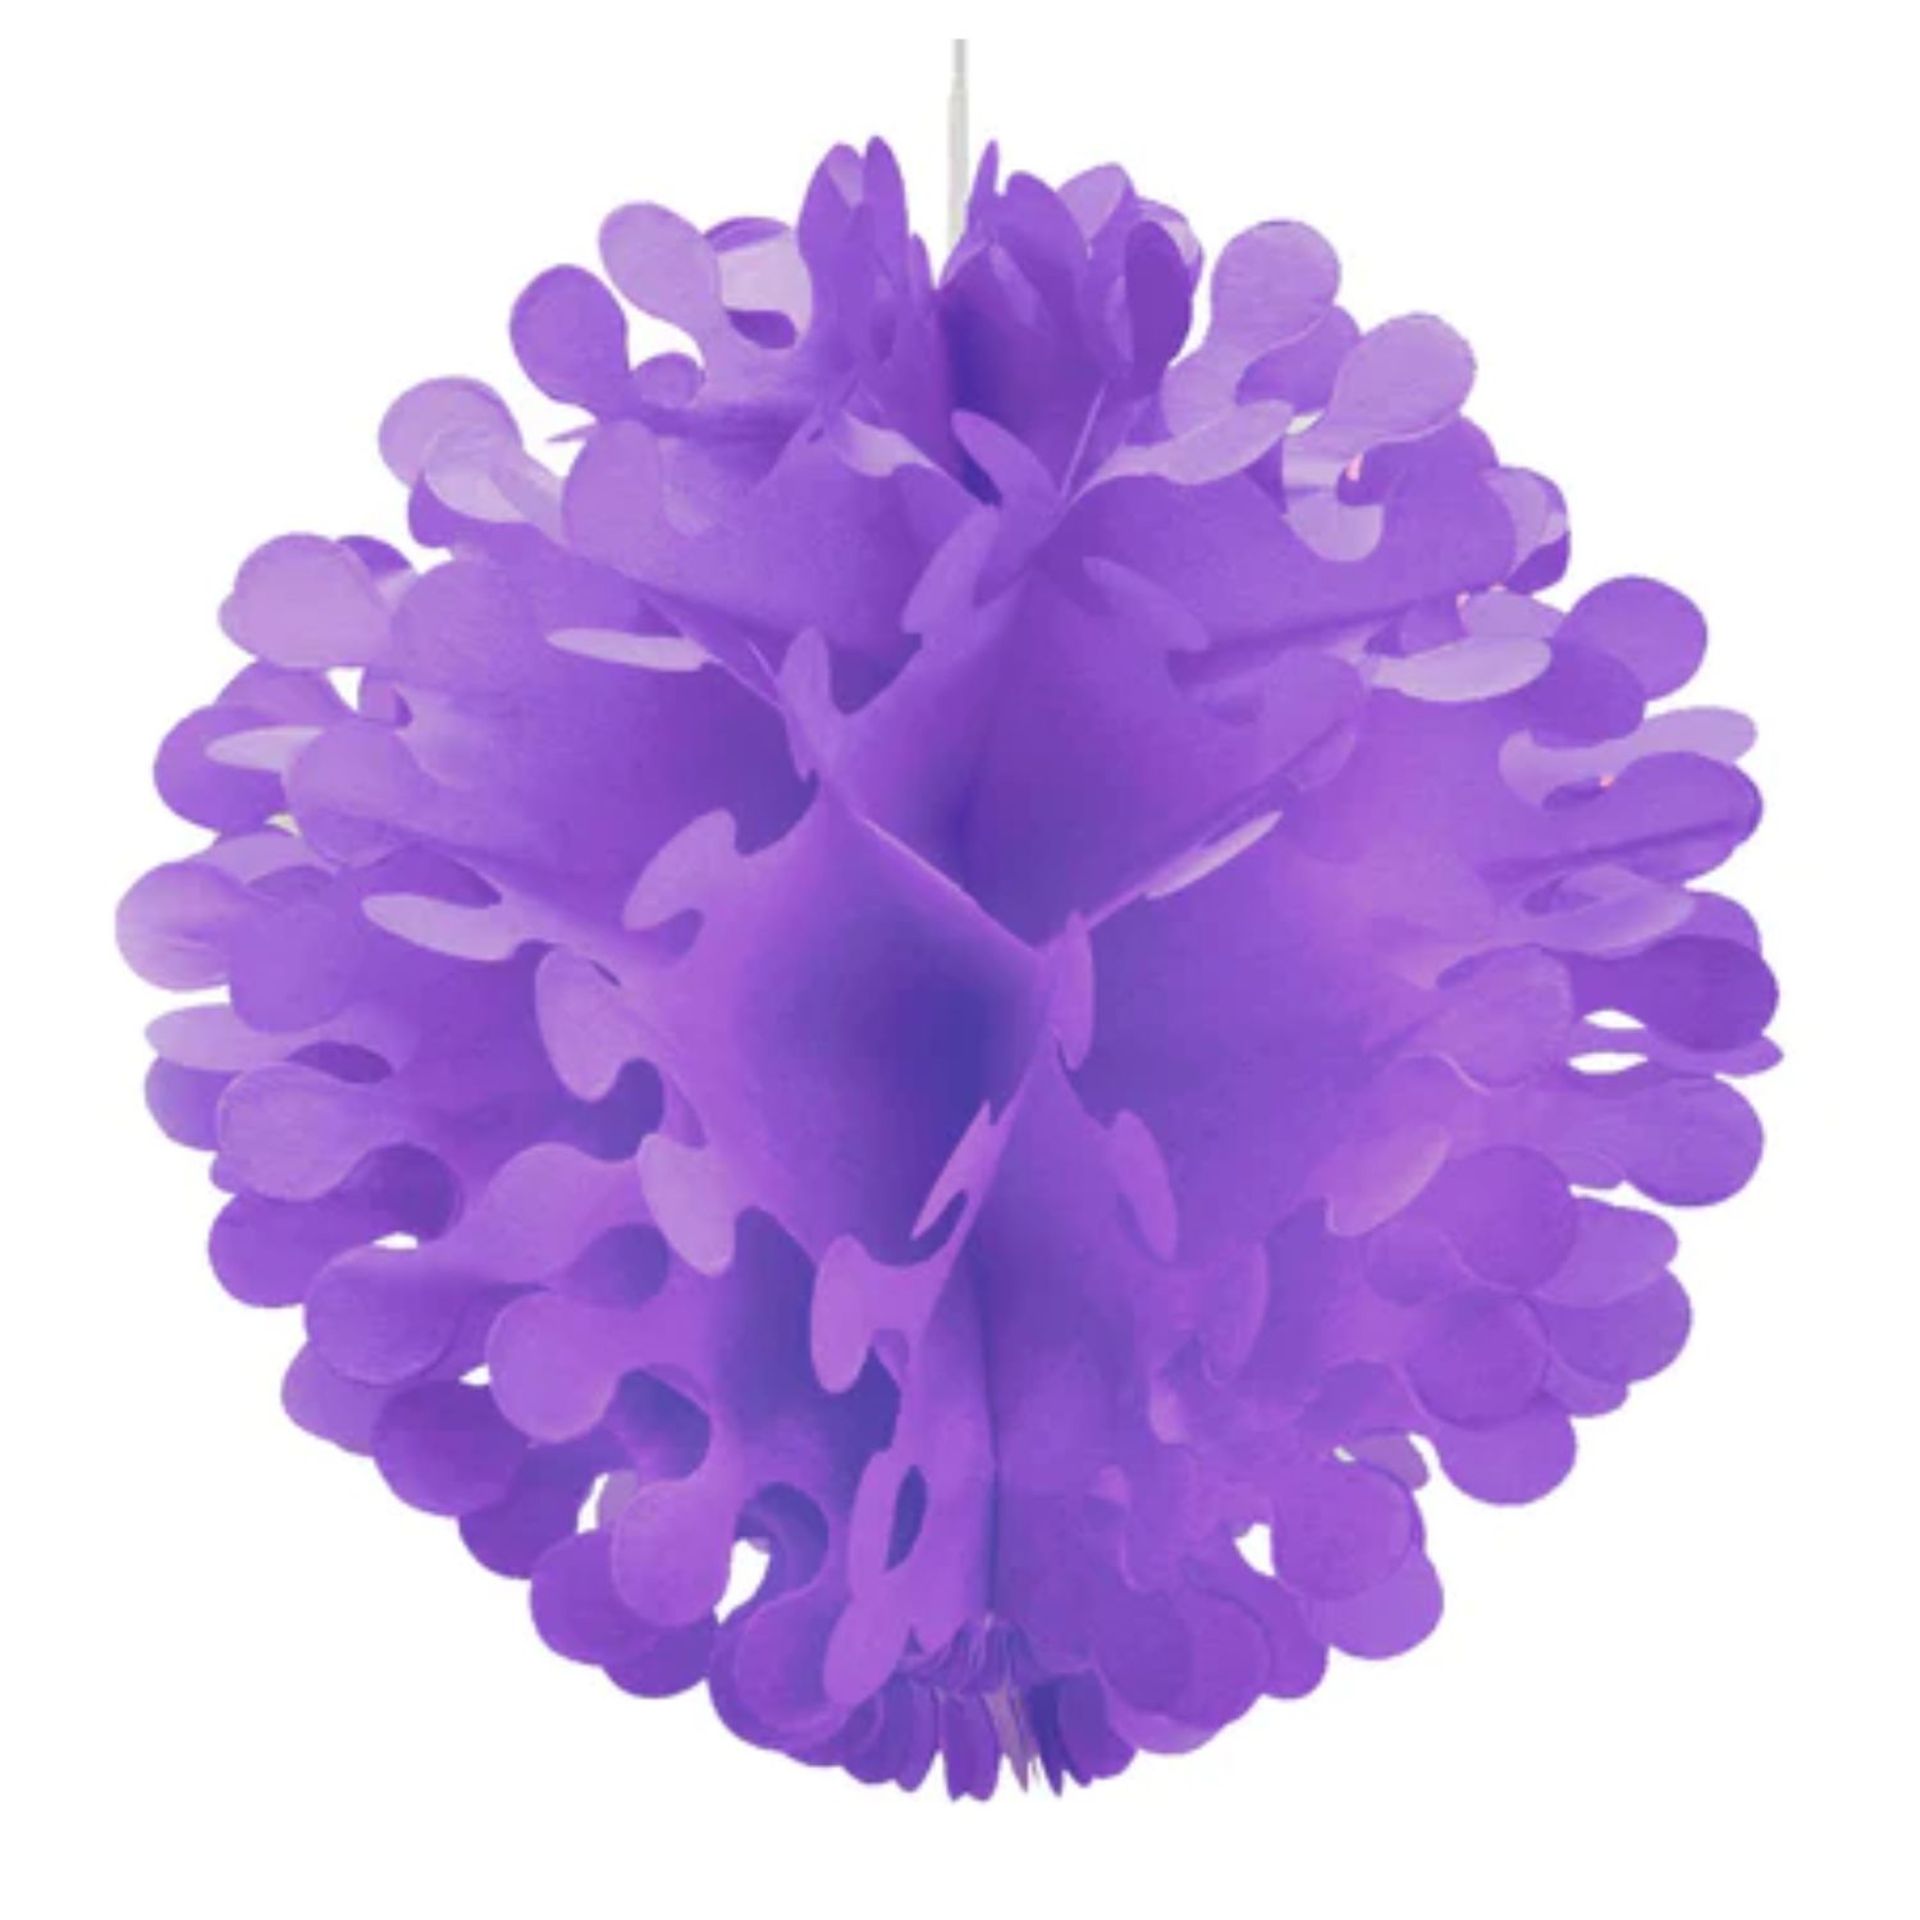 1000 PARTY SUPPLIES 12" FLUTTER TISSUE PAPER BALL - RANGE OF COLOURS, RRP £10,000 - Image 6 of 9